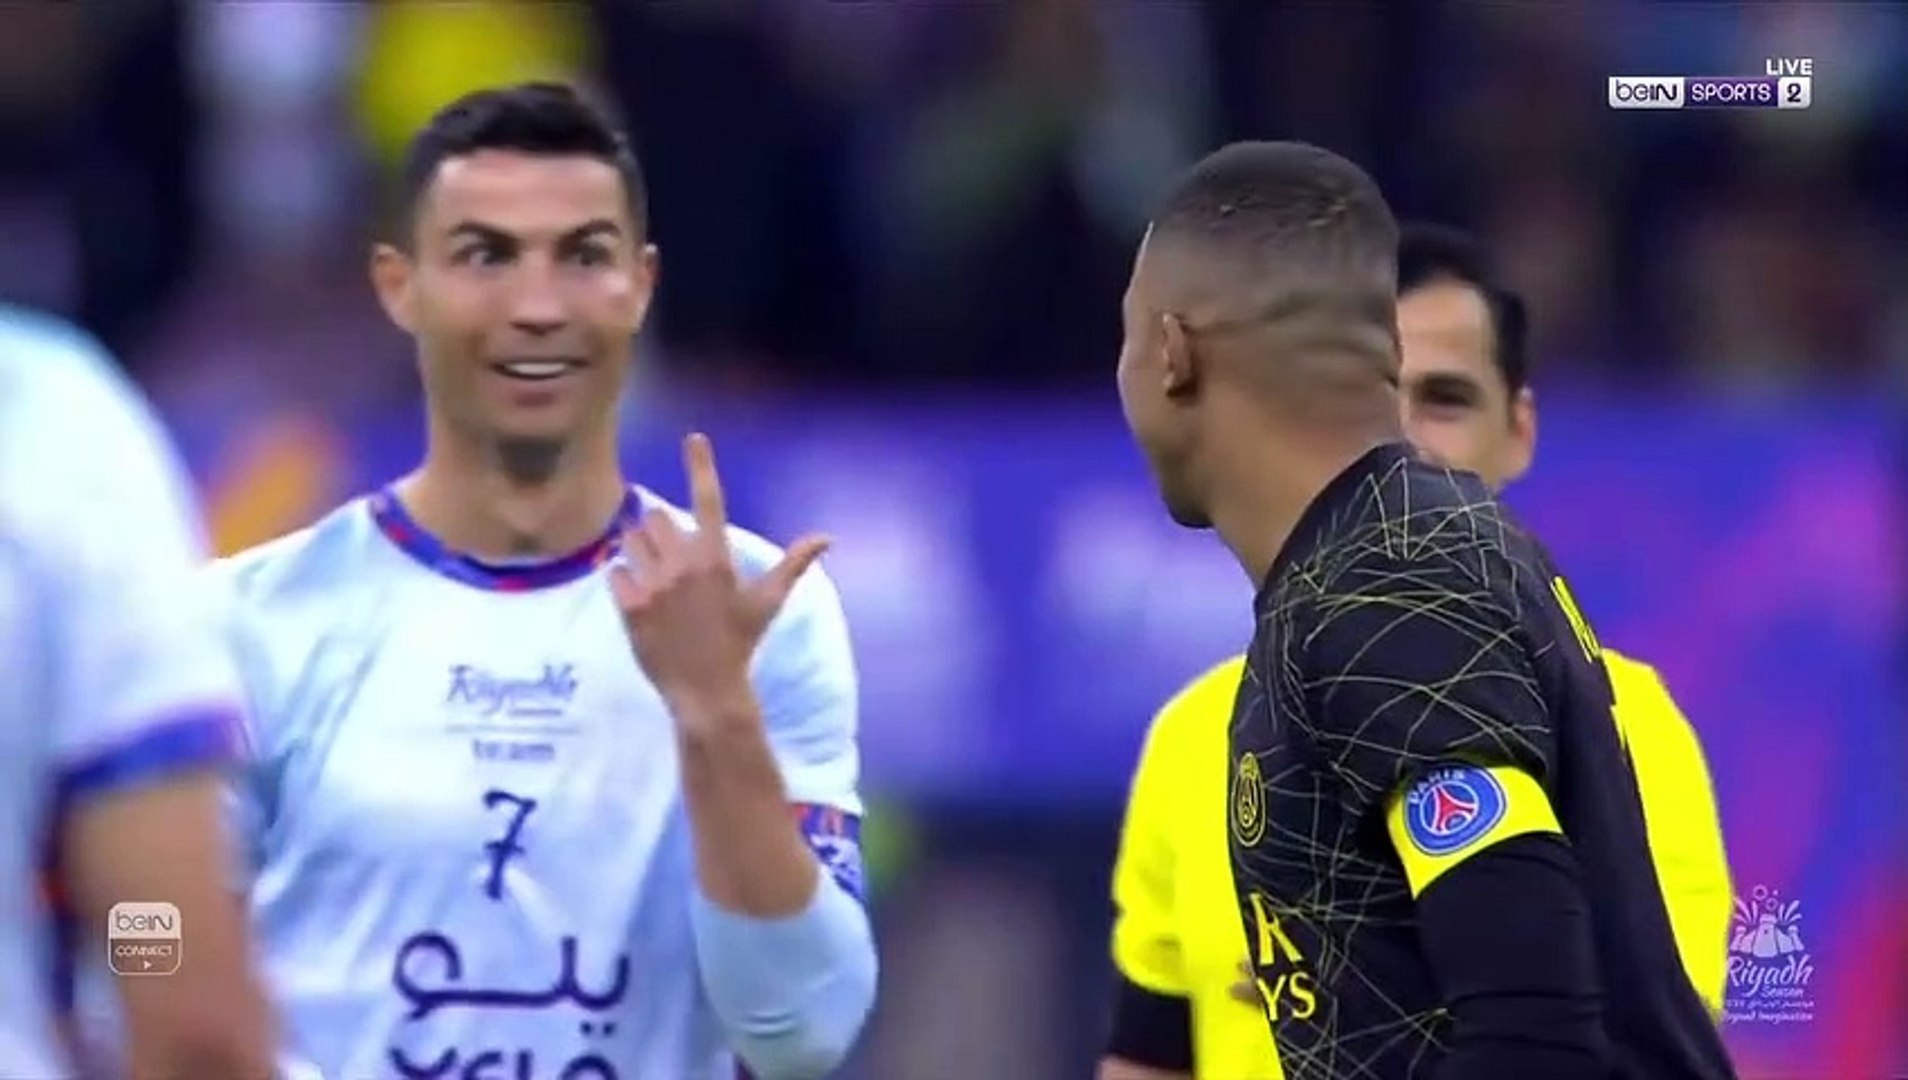 Kylian Mbappe was inspecting Cristiano Ronaldos bruise ❤️